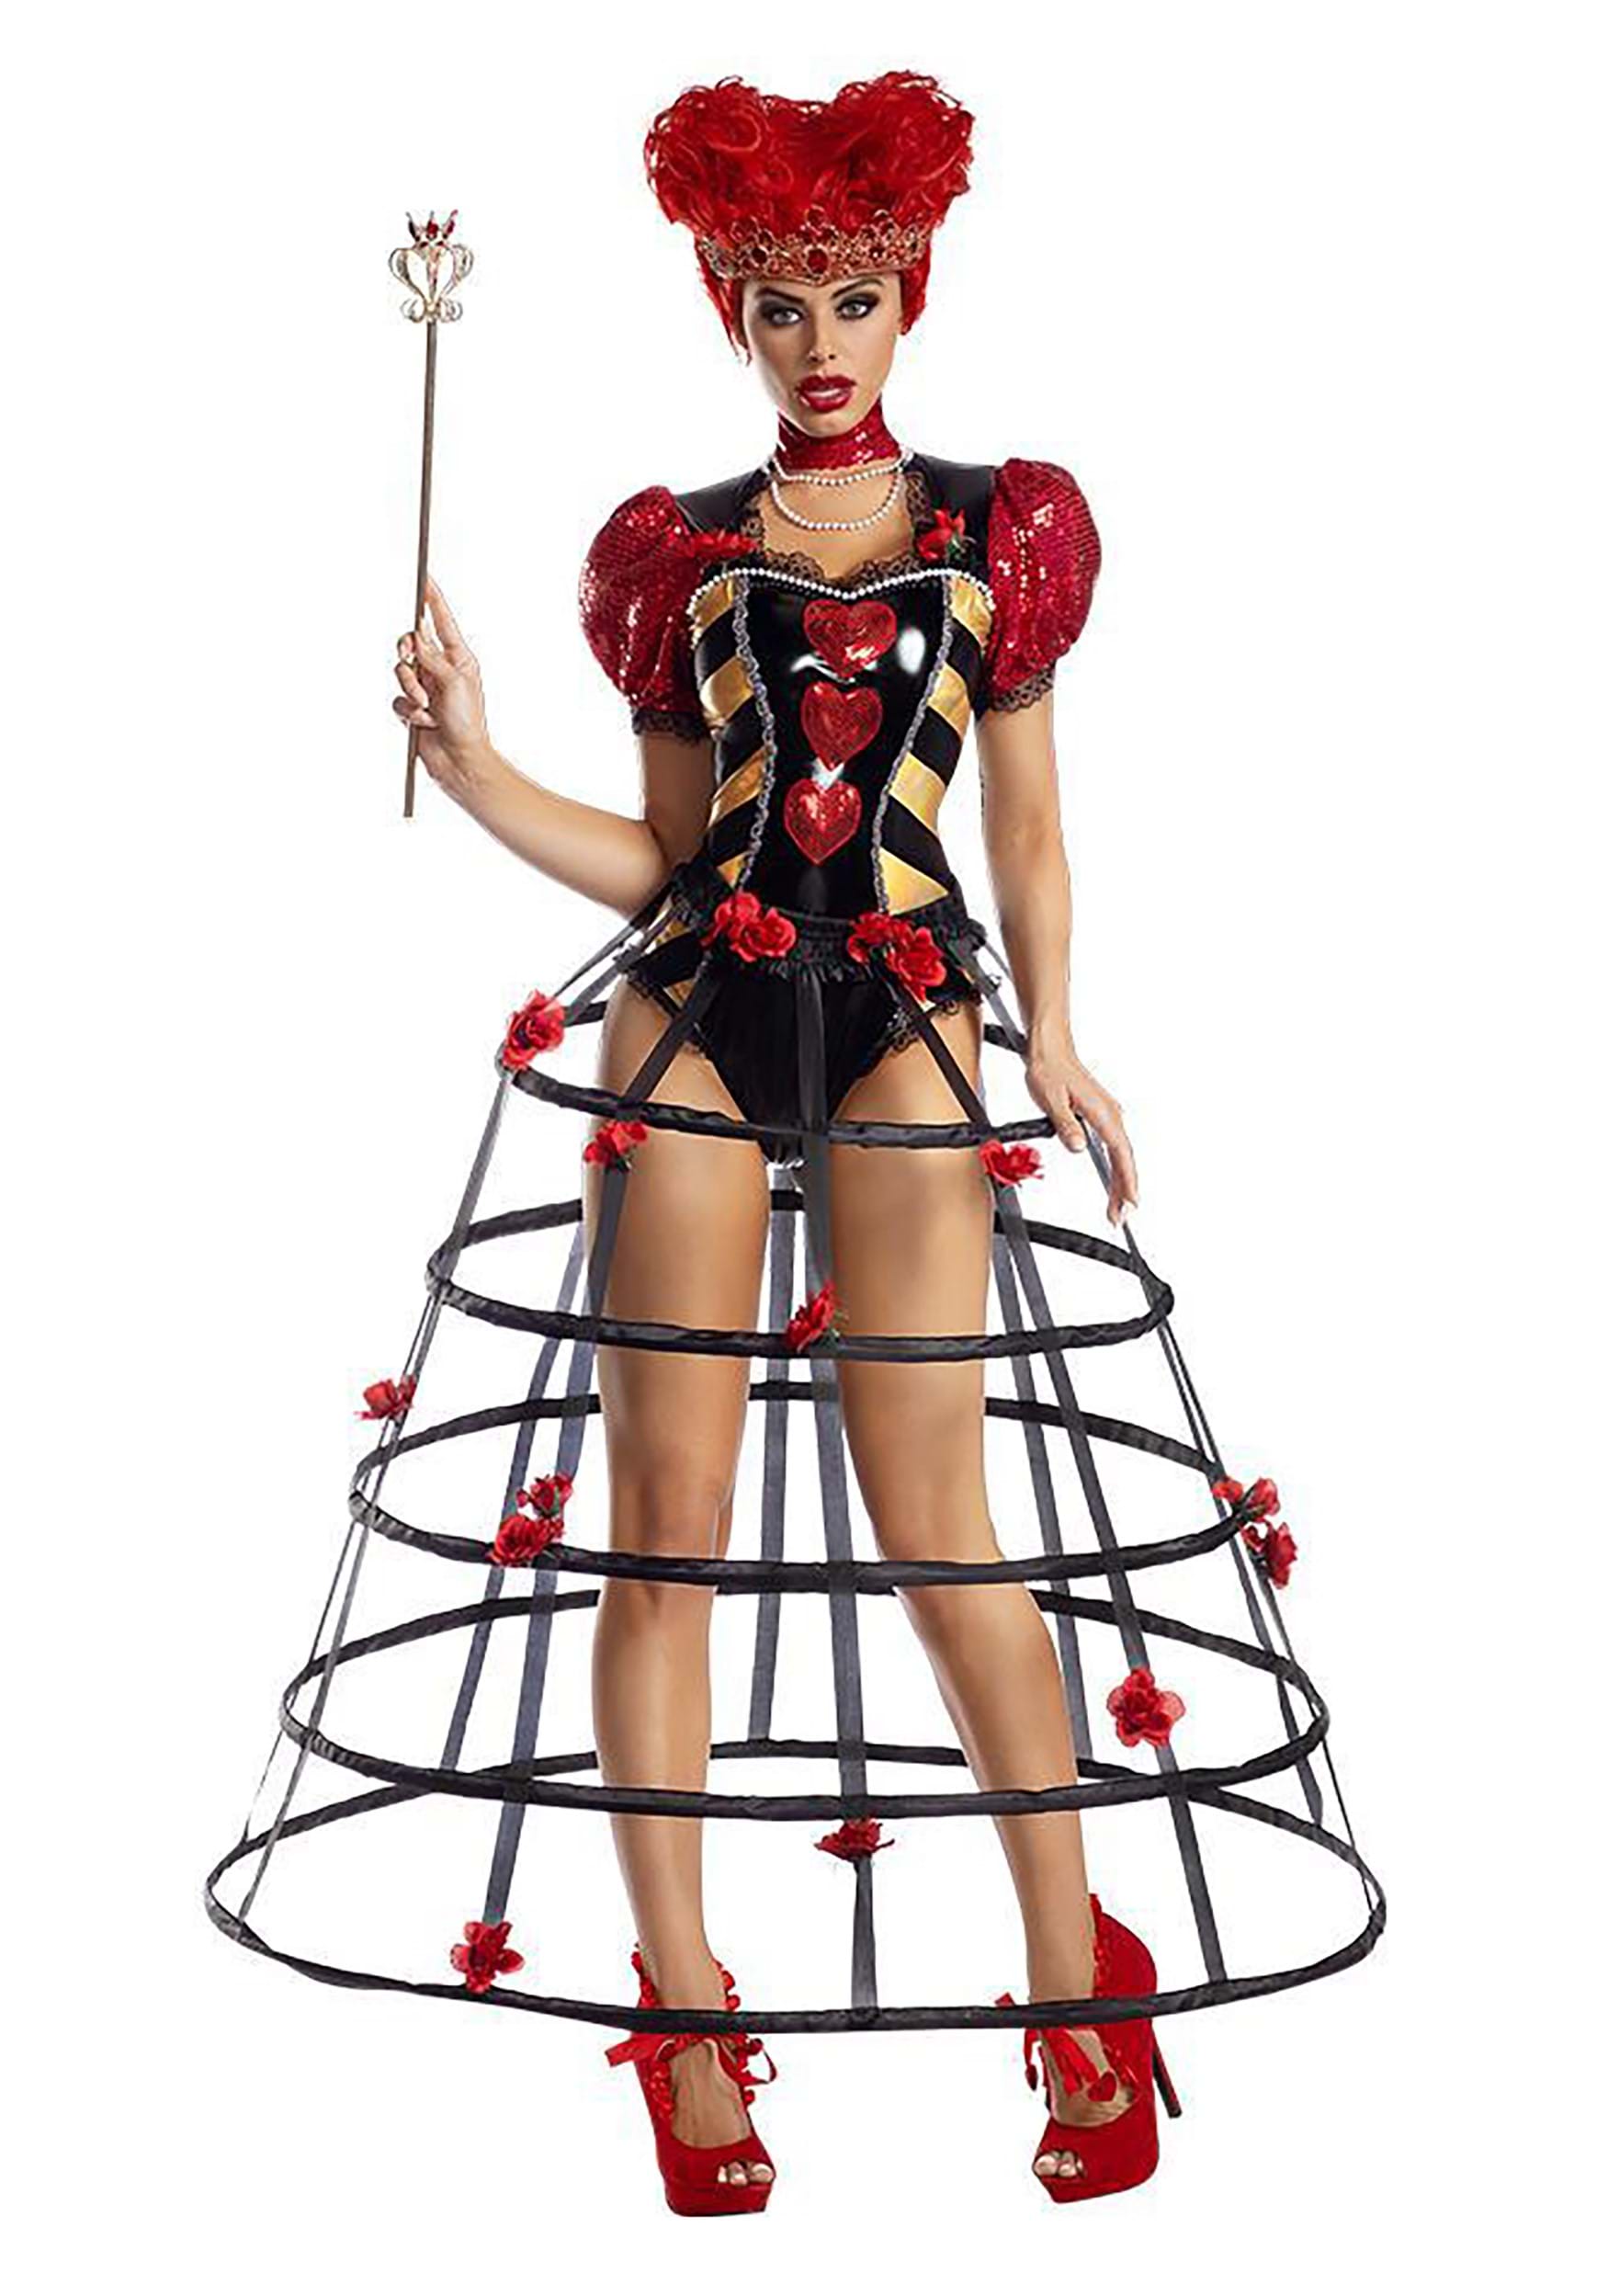 Image of Caged Heart Queen Costume ID PKPK2150-XL